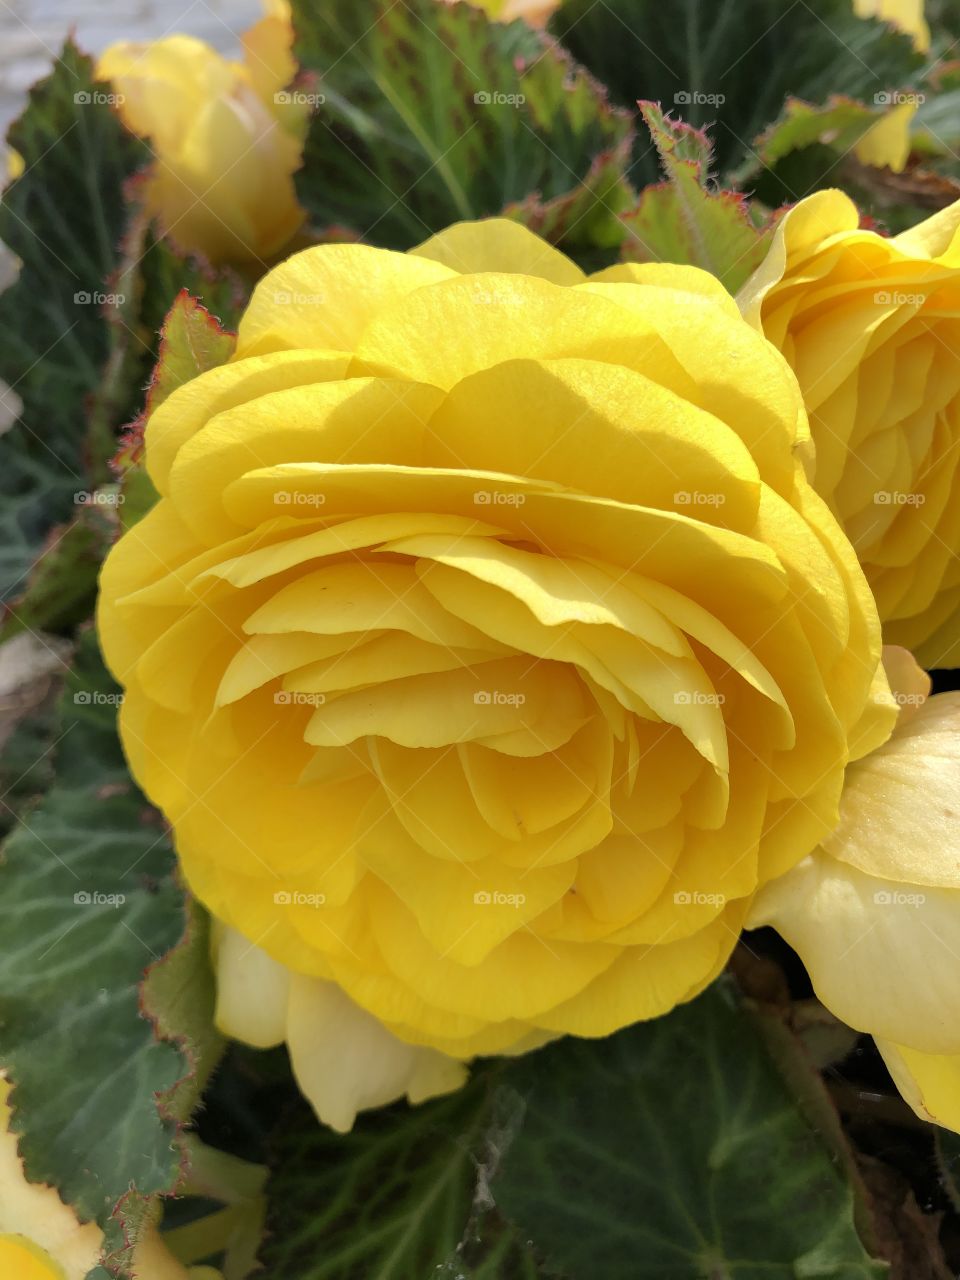 I collected this lovely yellow rose on council gardens in Newquay, Cornwall. What an amazing yellow star this is.